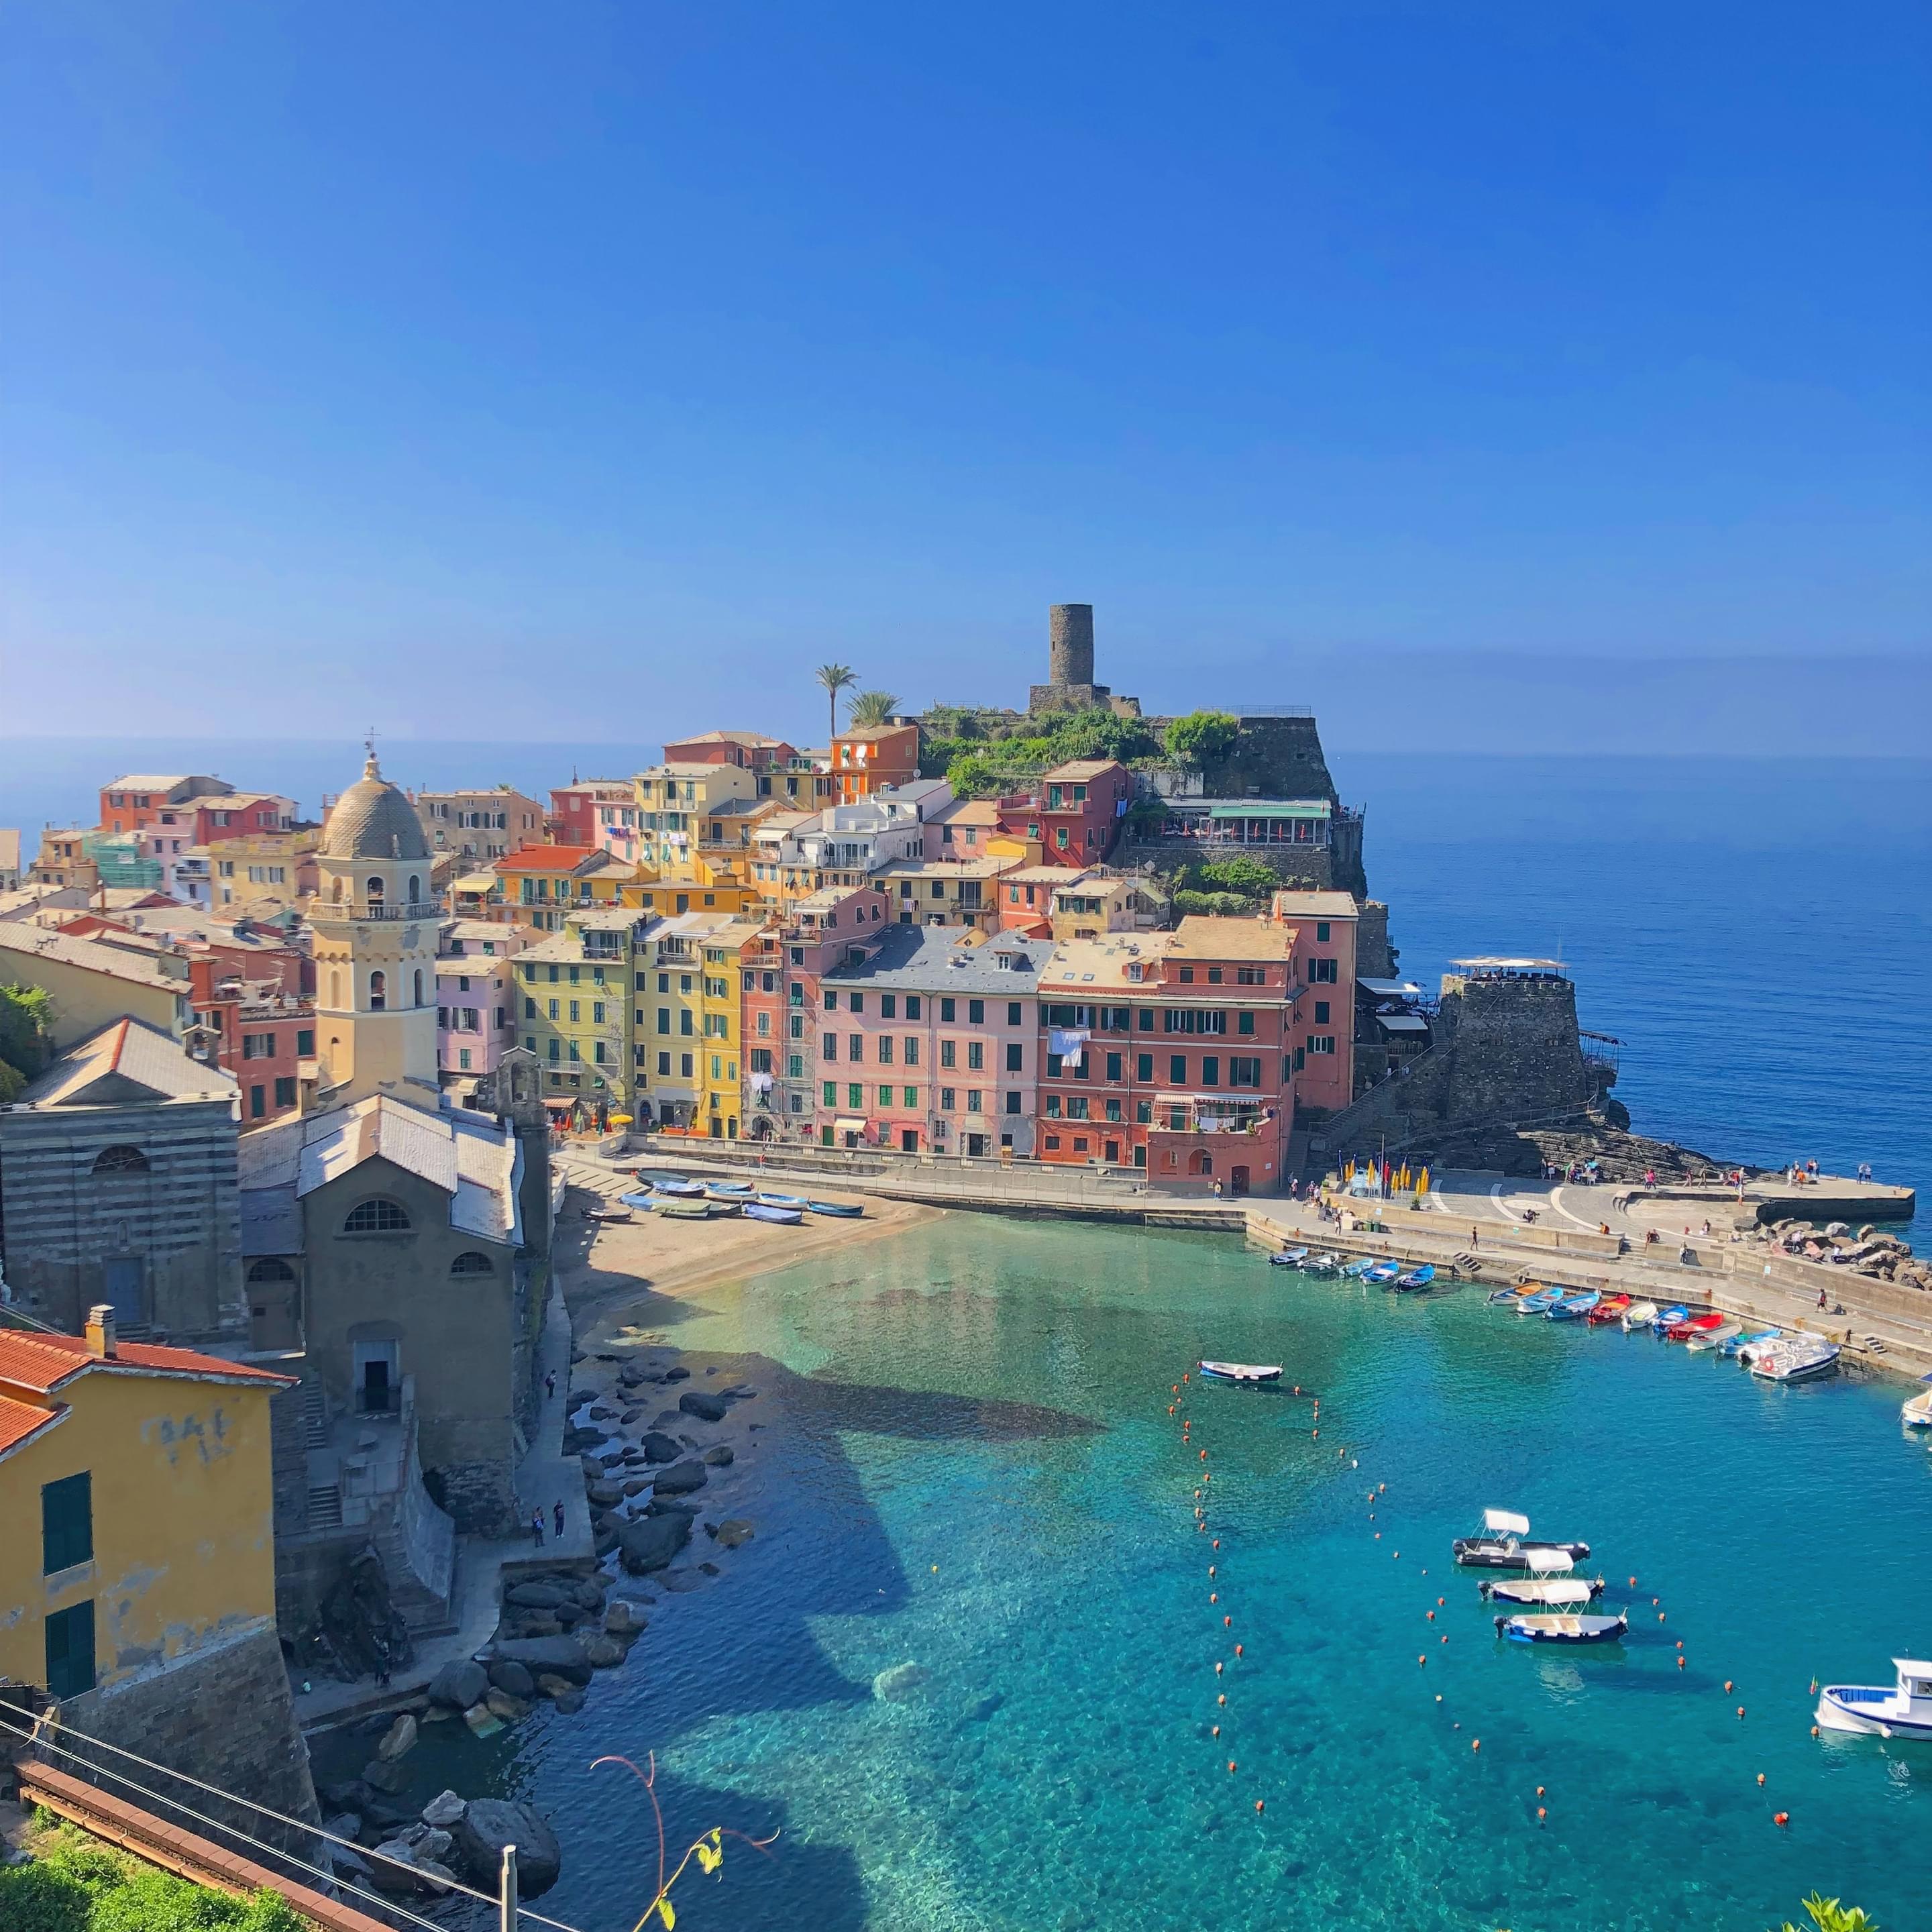 Vernazza Overview